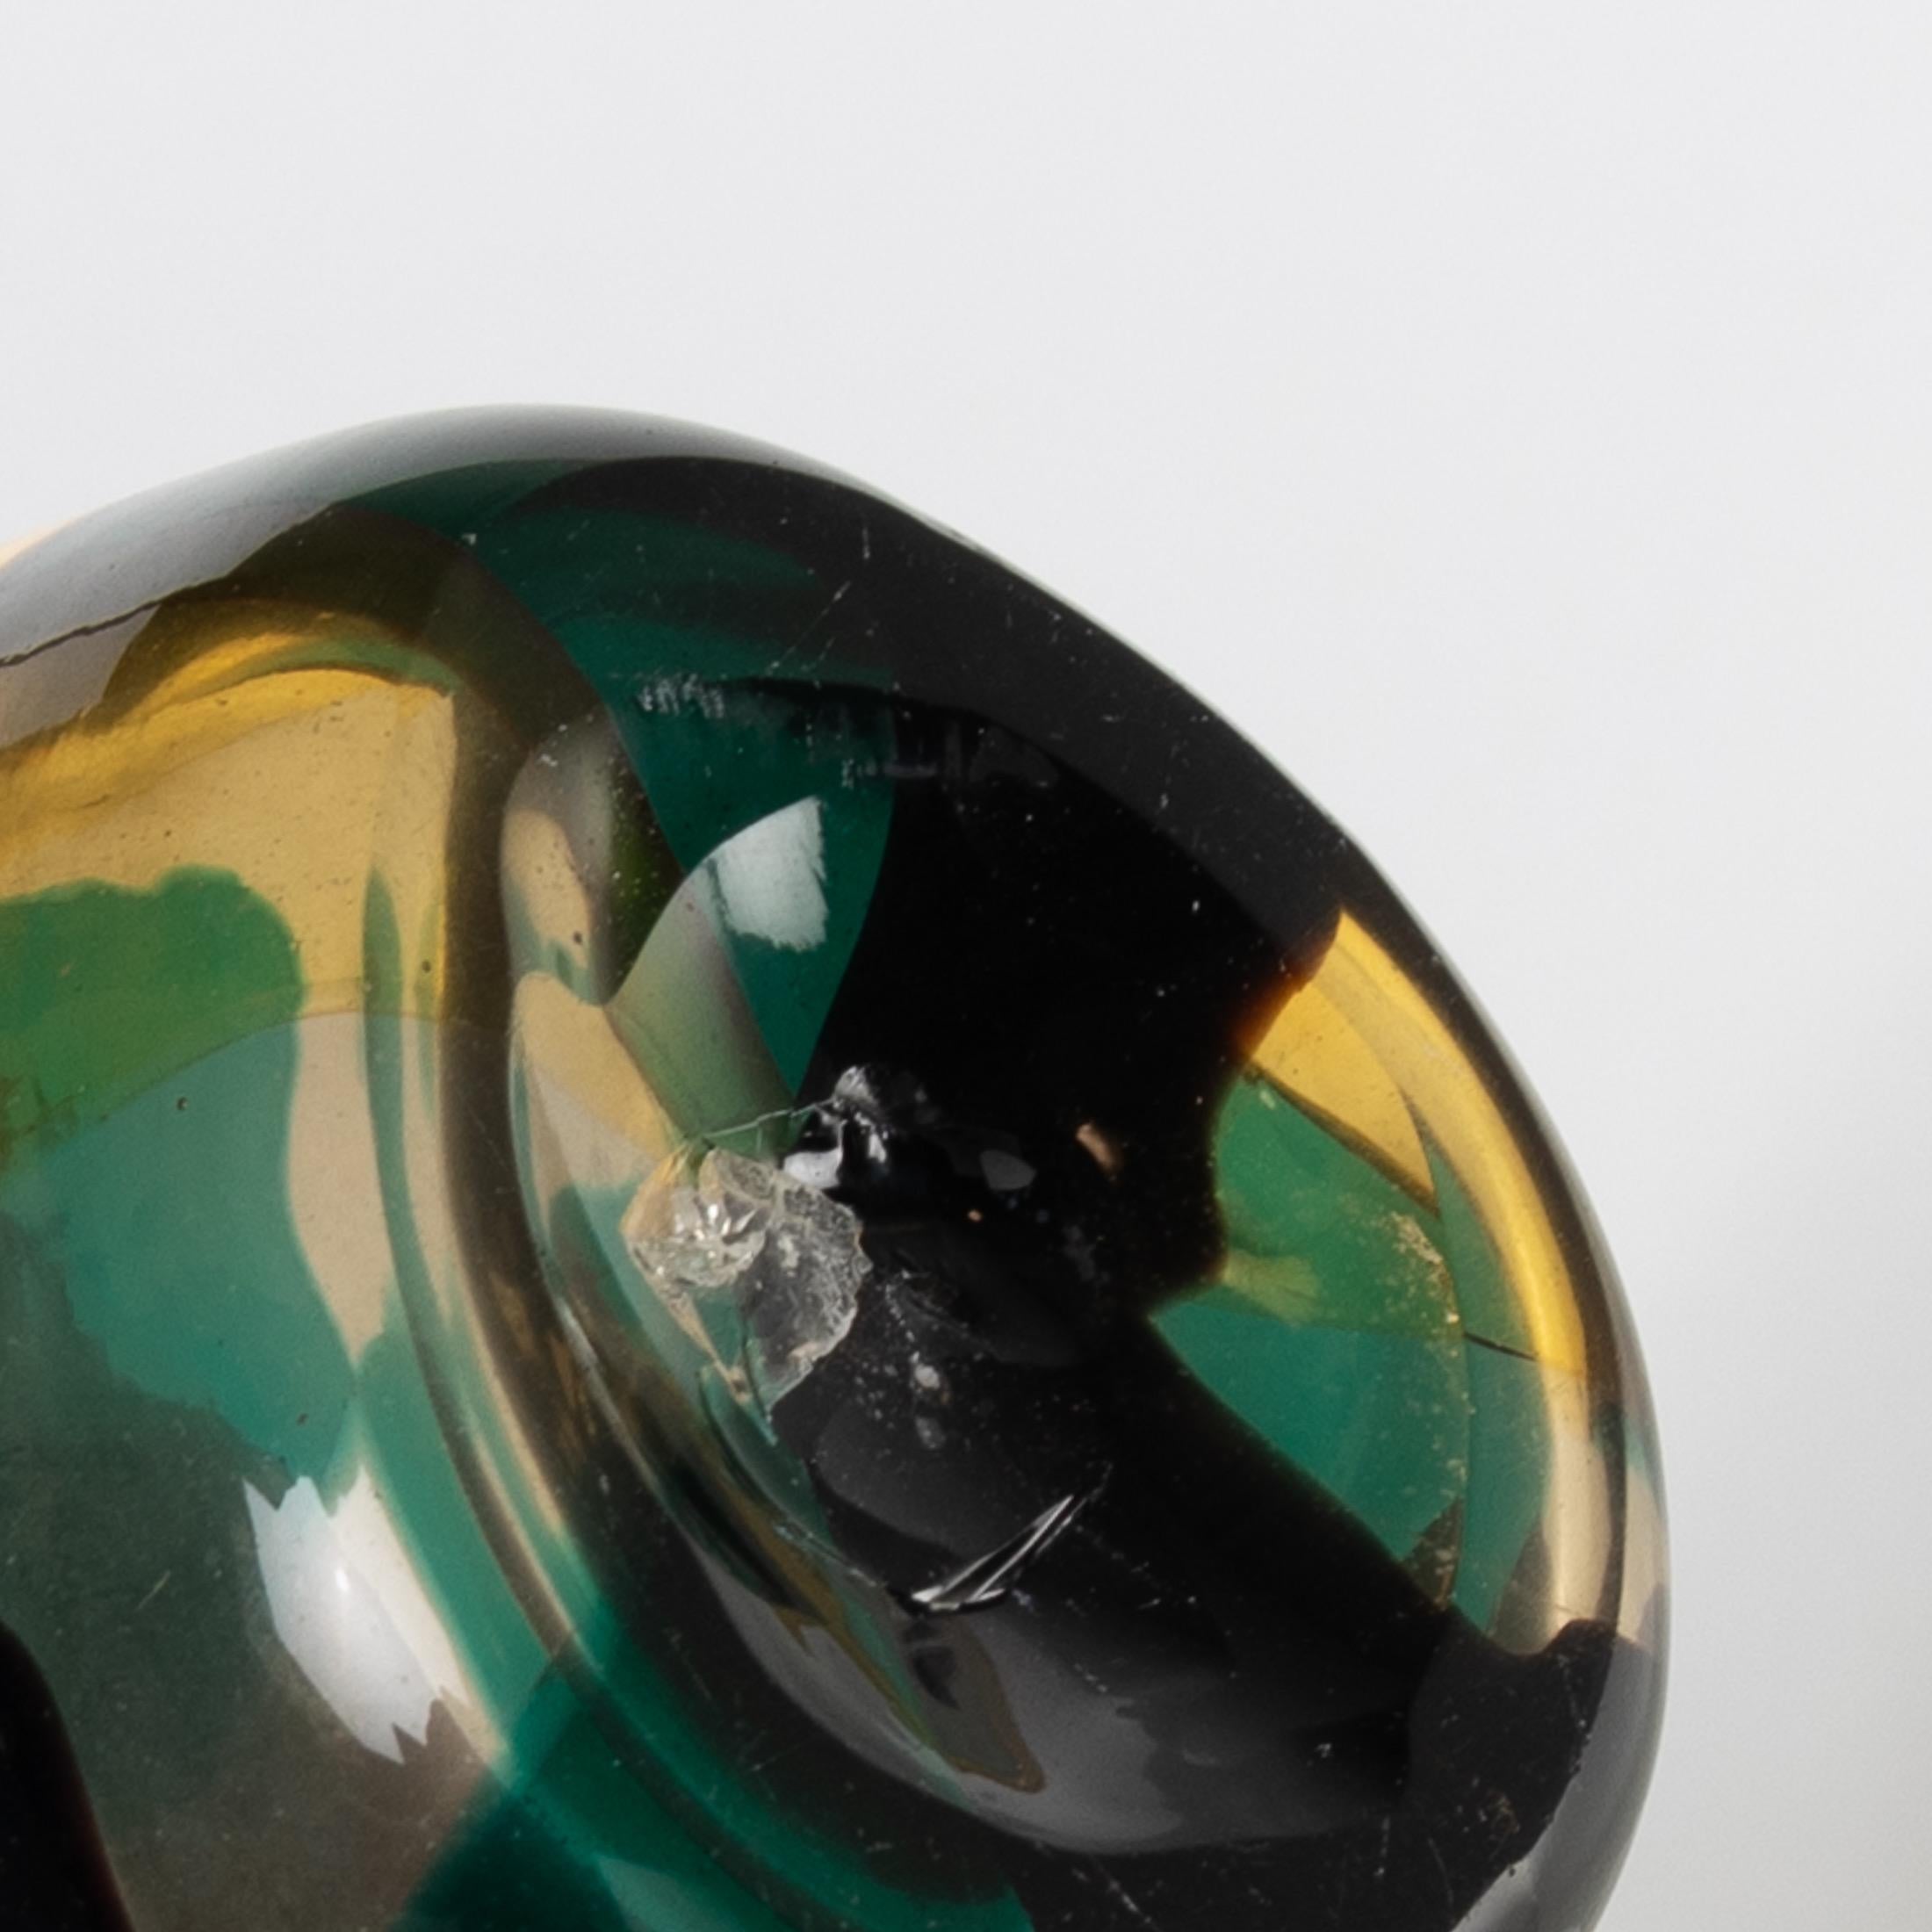 Art Glass Vase from the “Pezzato” Series 'Referenced under Number 4393' by Fulvio Bianconi